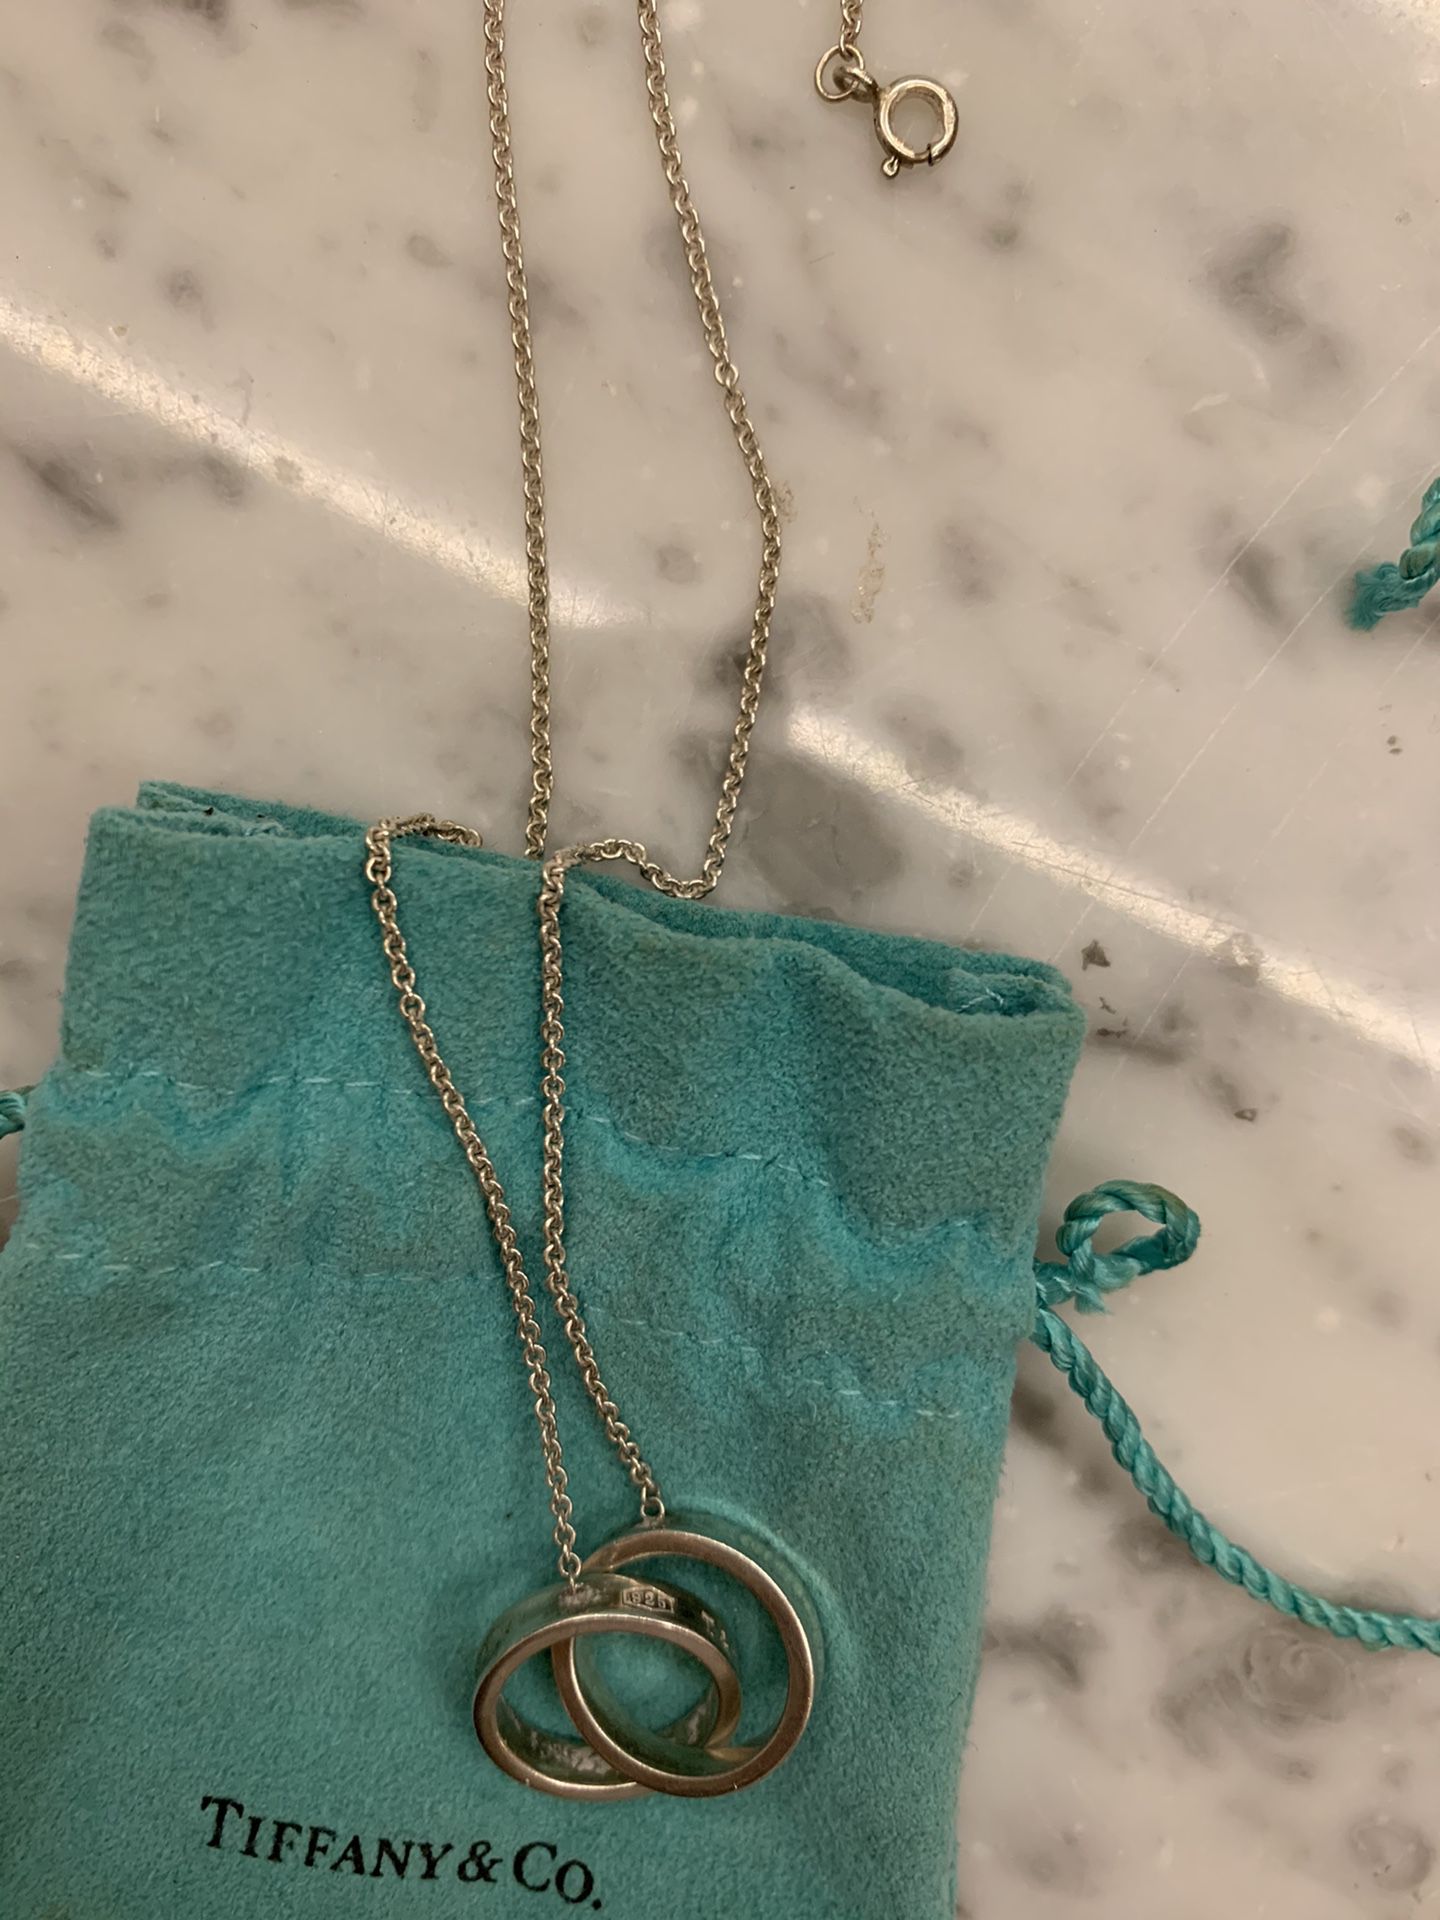 Tiffany & Co ring necklace